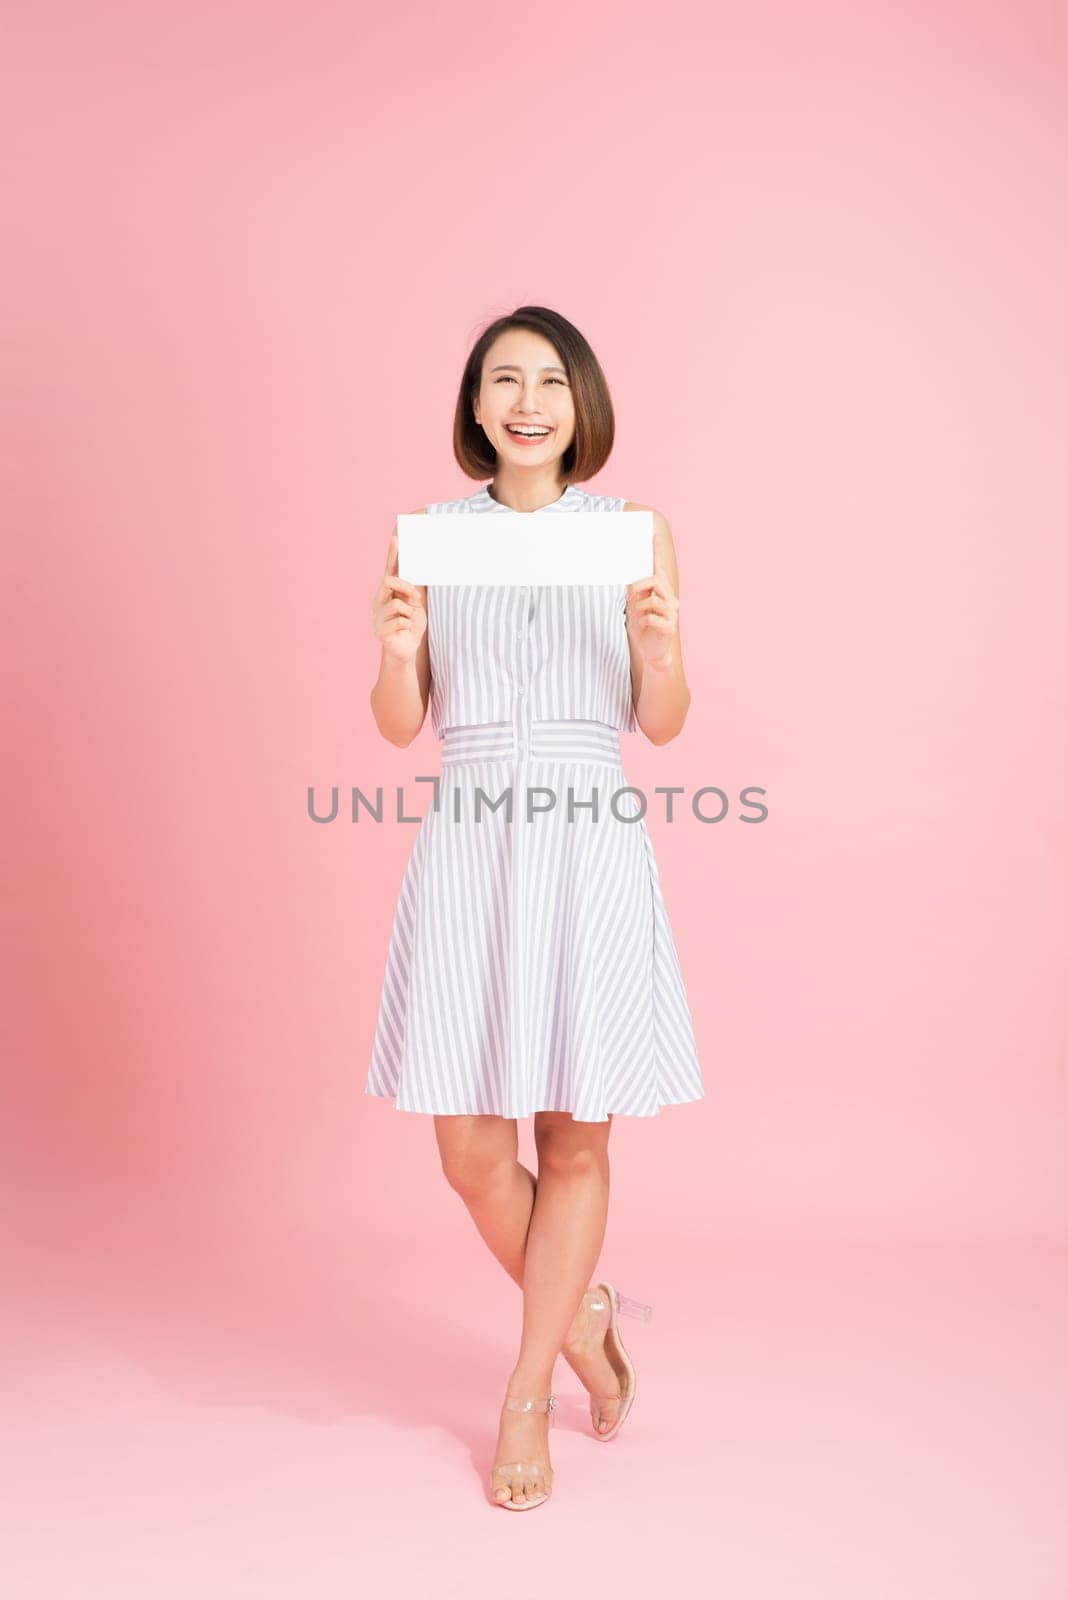 Attractive woman holding paper blank in her hands. Portrait of emotional young woman showing surprised and happy emotions by makidotvn